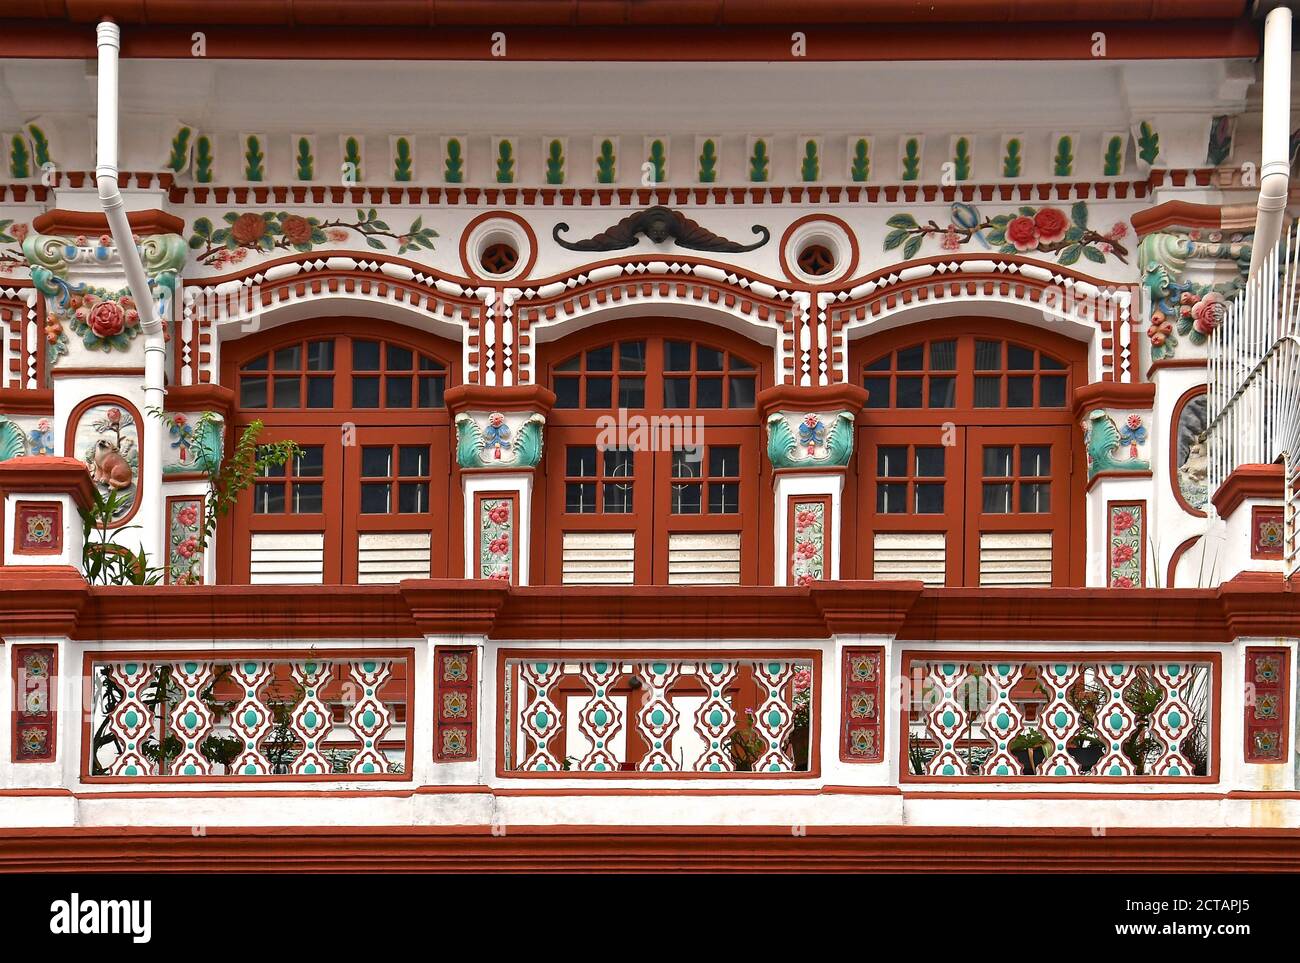 Restored Chinese peranakan shop house with brown wooden louvred shutters and ornately decorated ballustrades on the balcony. Stock Photo